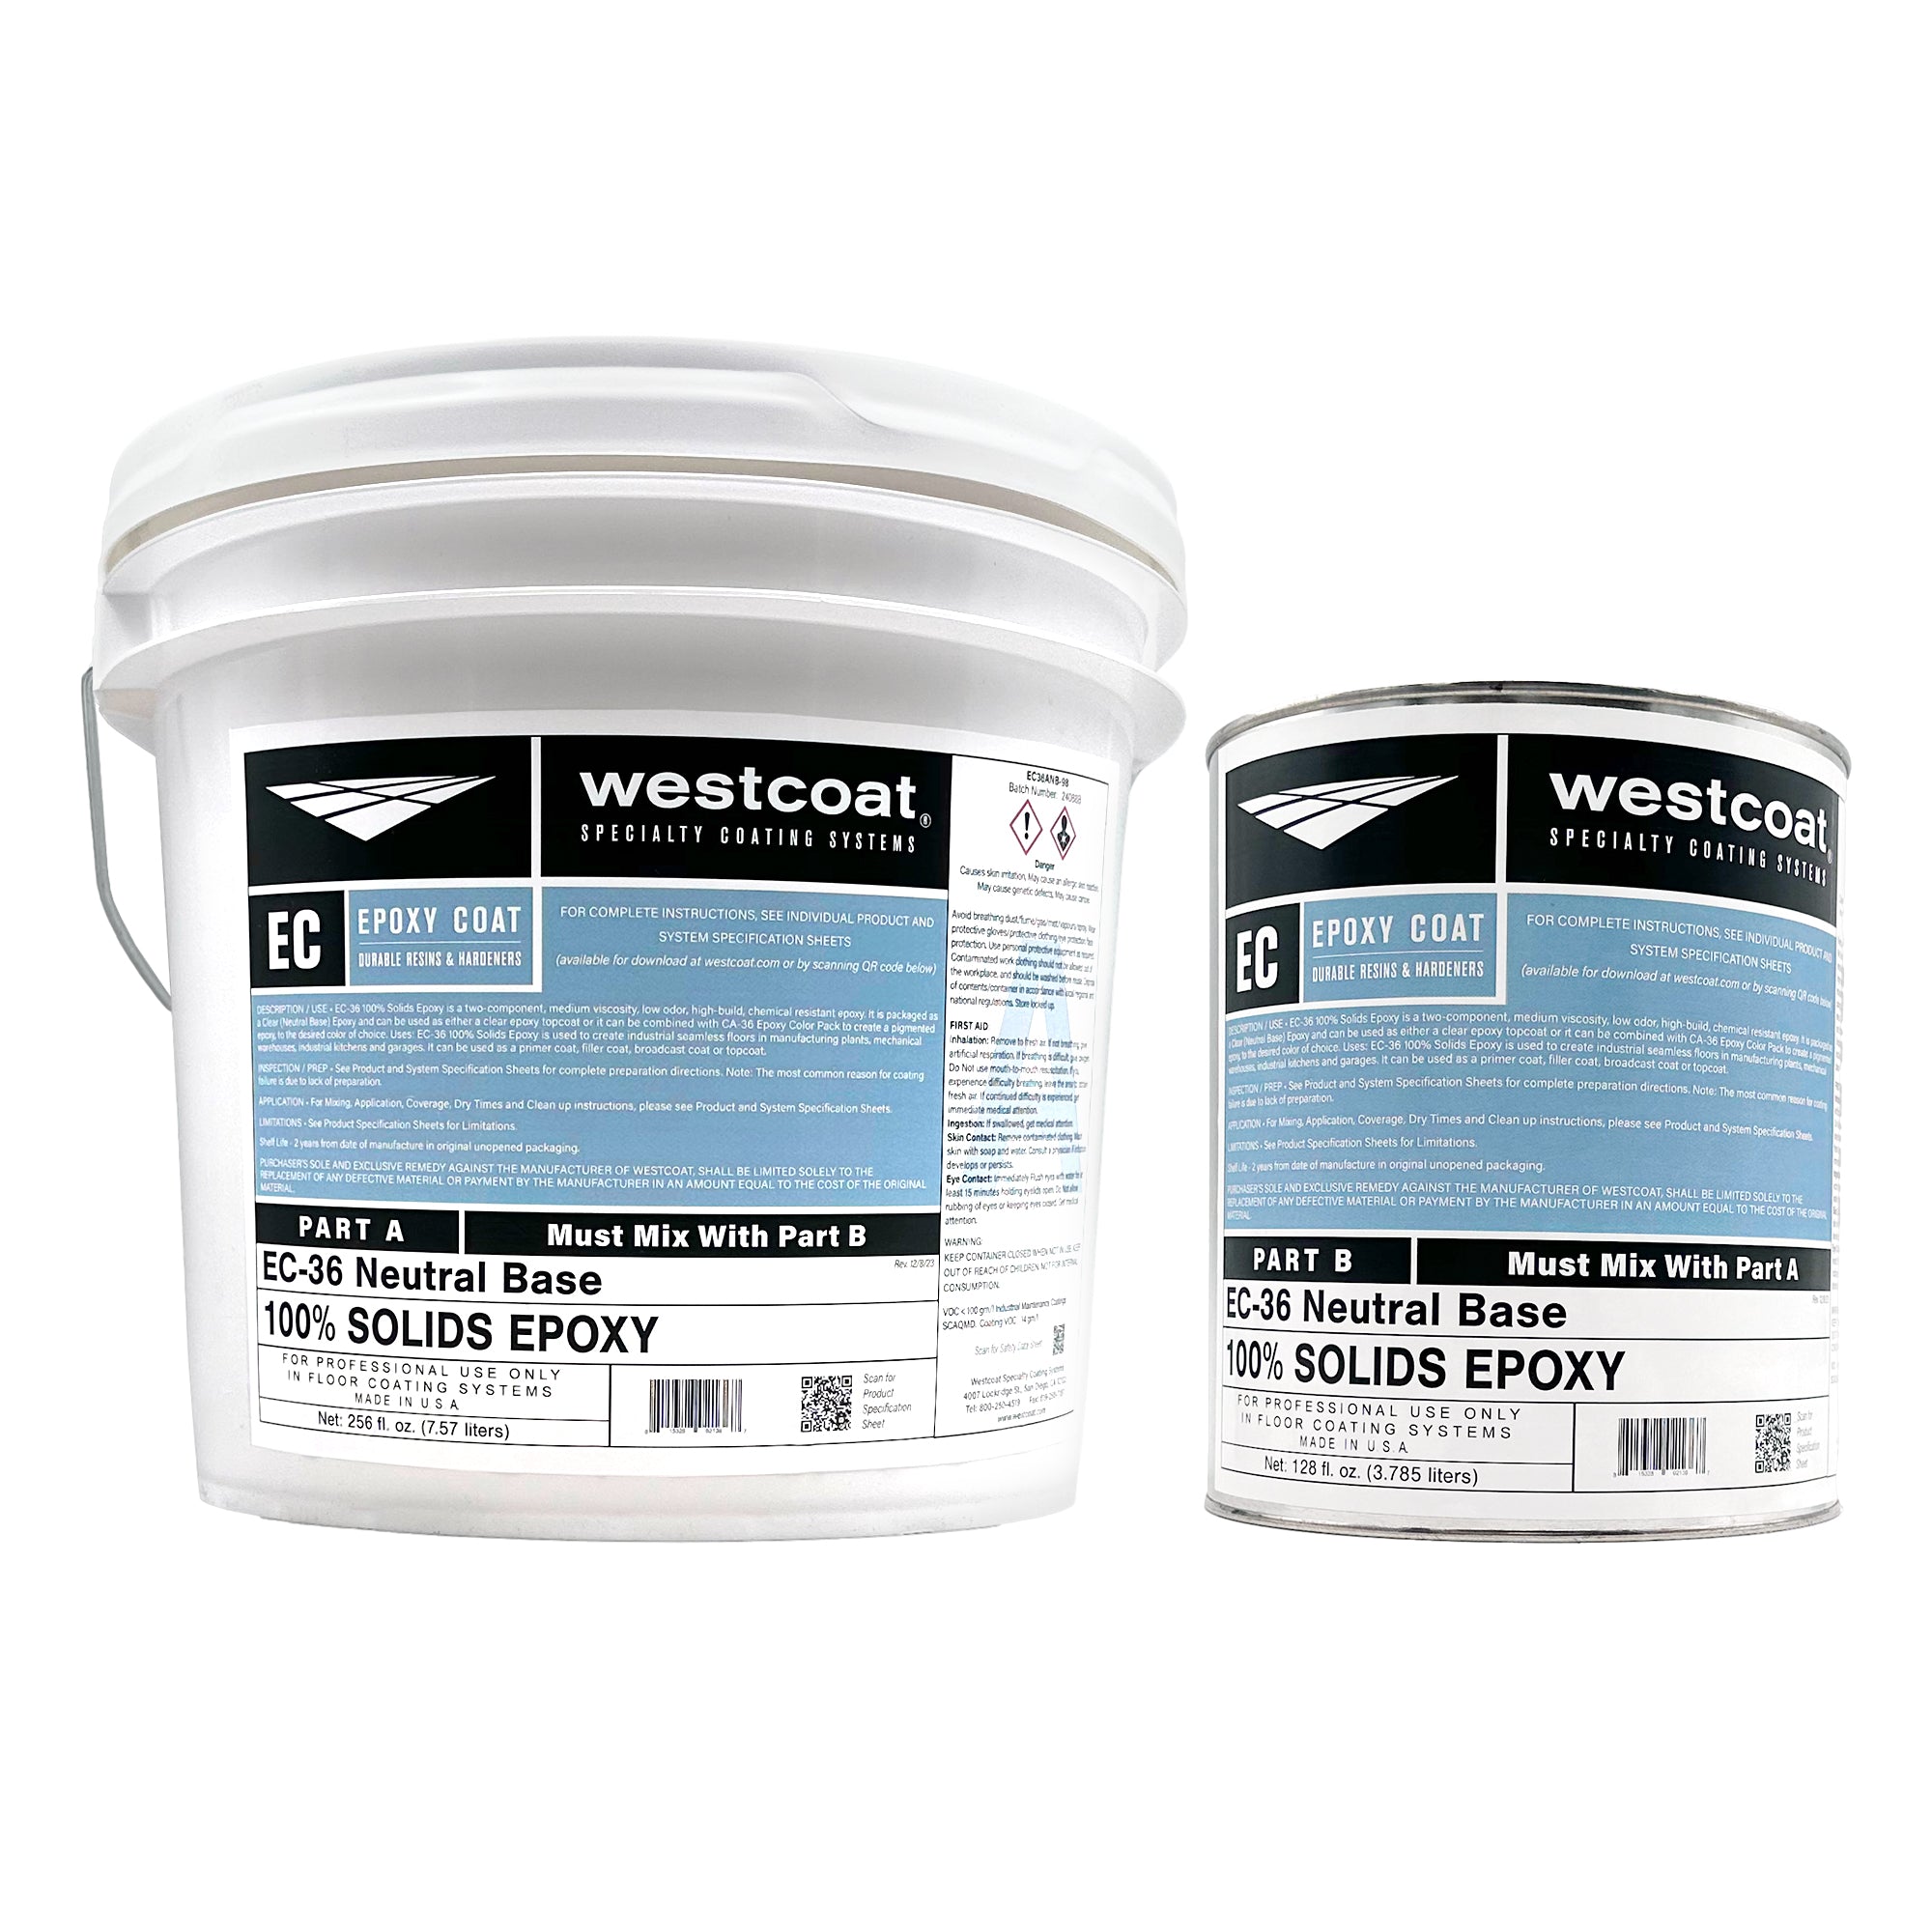 New CA-36 Color Packs - Westcoat Specialty Coating Systems